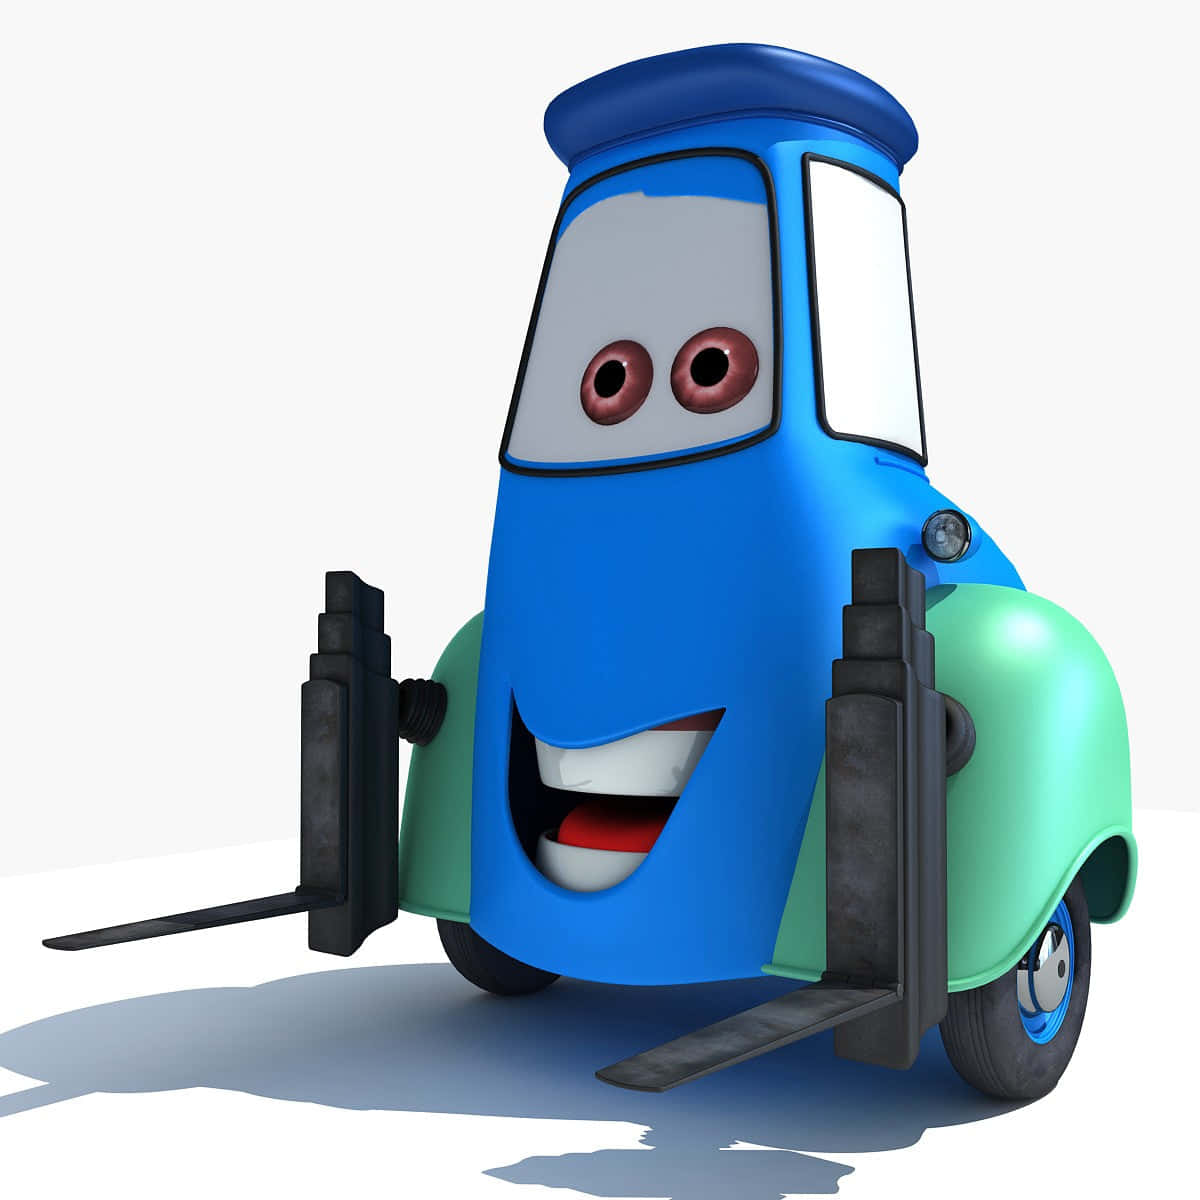 A Cartoon Car With Wheels And A Smile